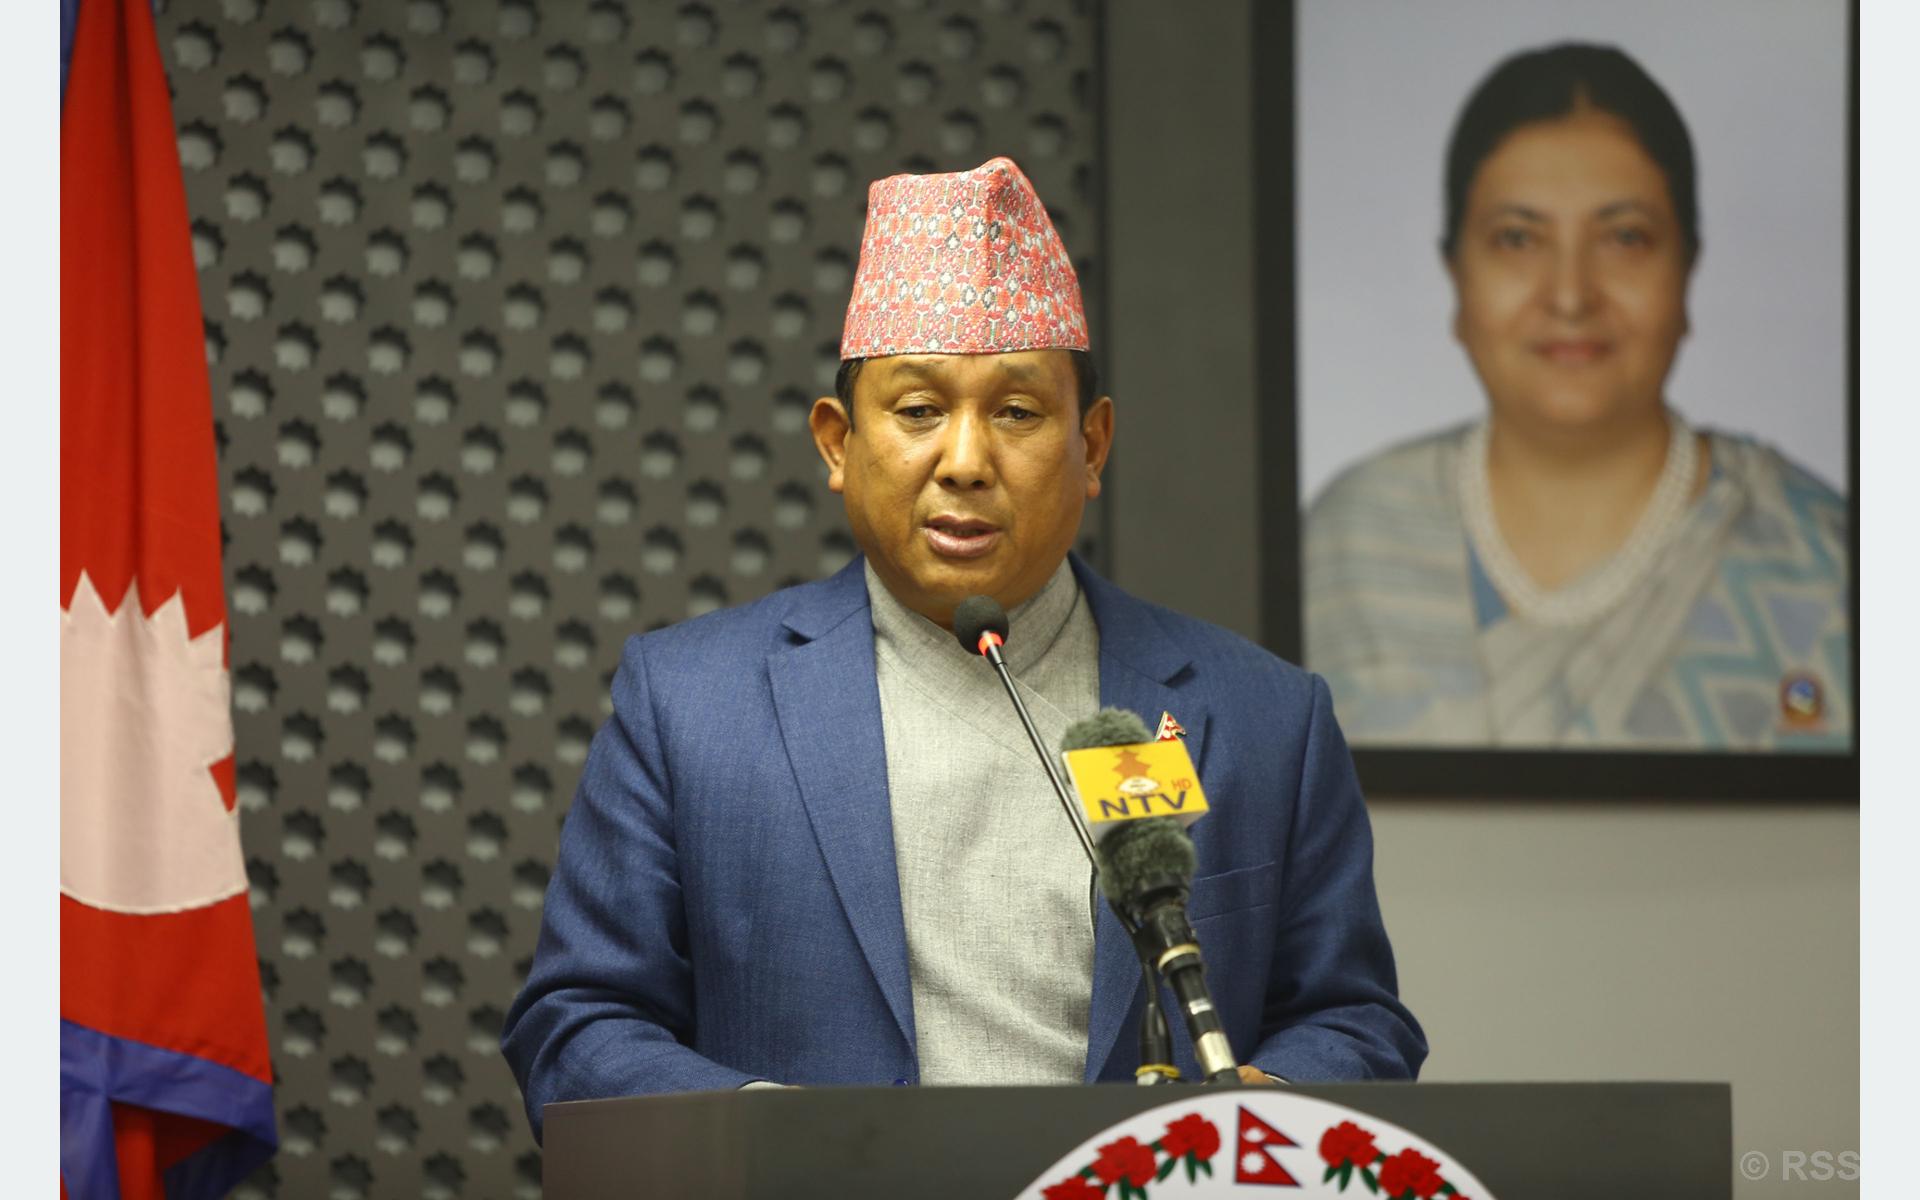 Minister Gurung urges all political parties to unite to protect lives